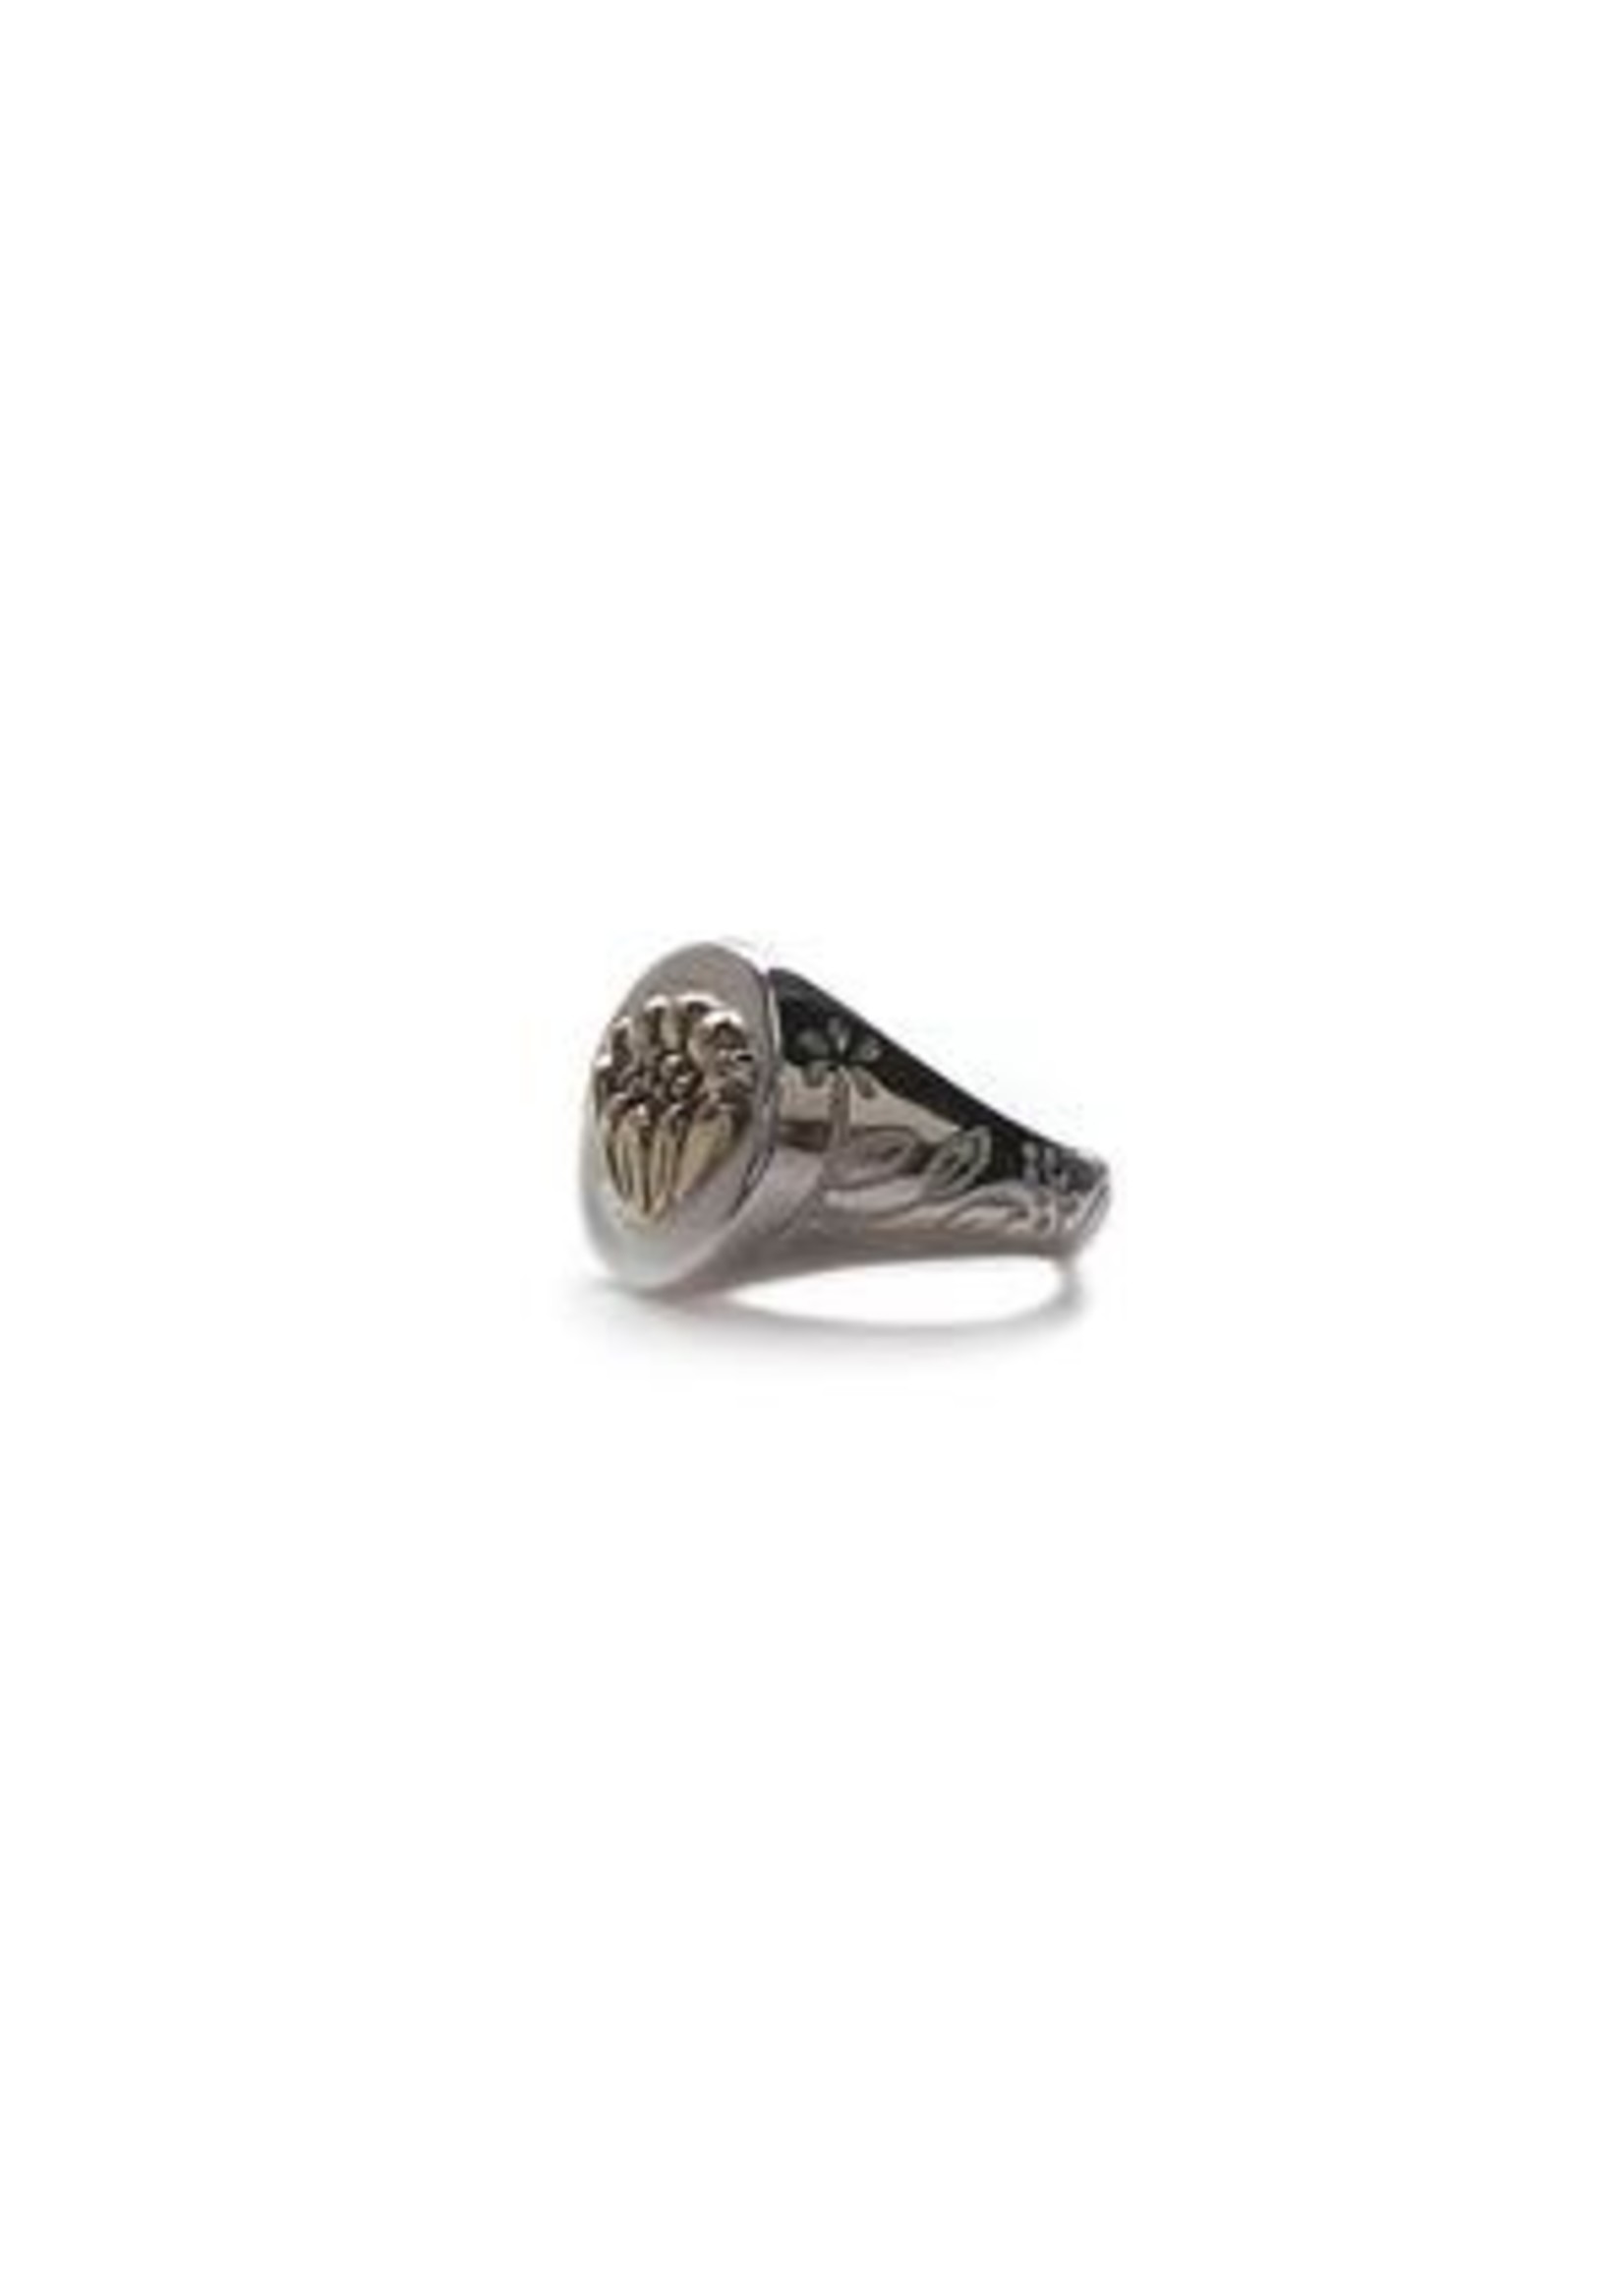 Hunt of Hounds Adonis Flower Signet Ring by Hunt of Hounds